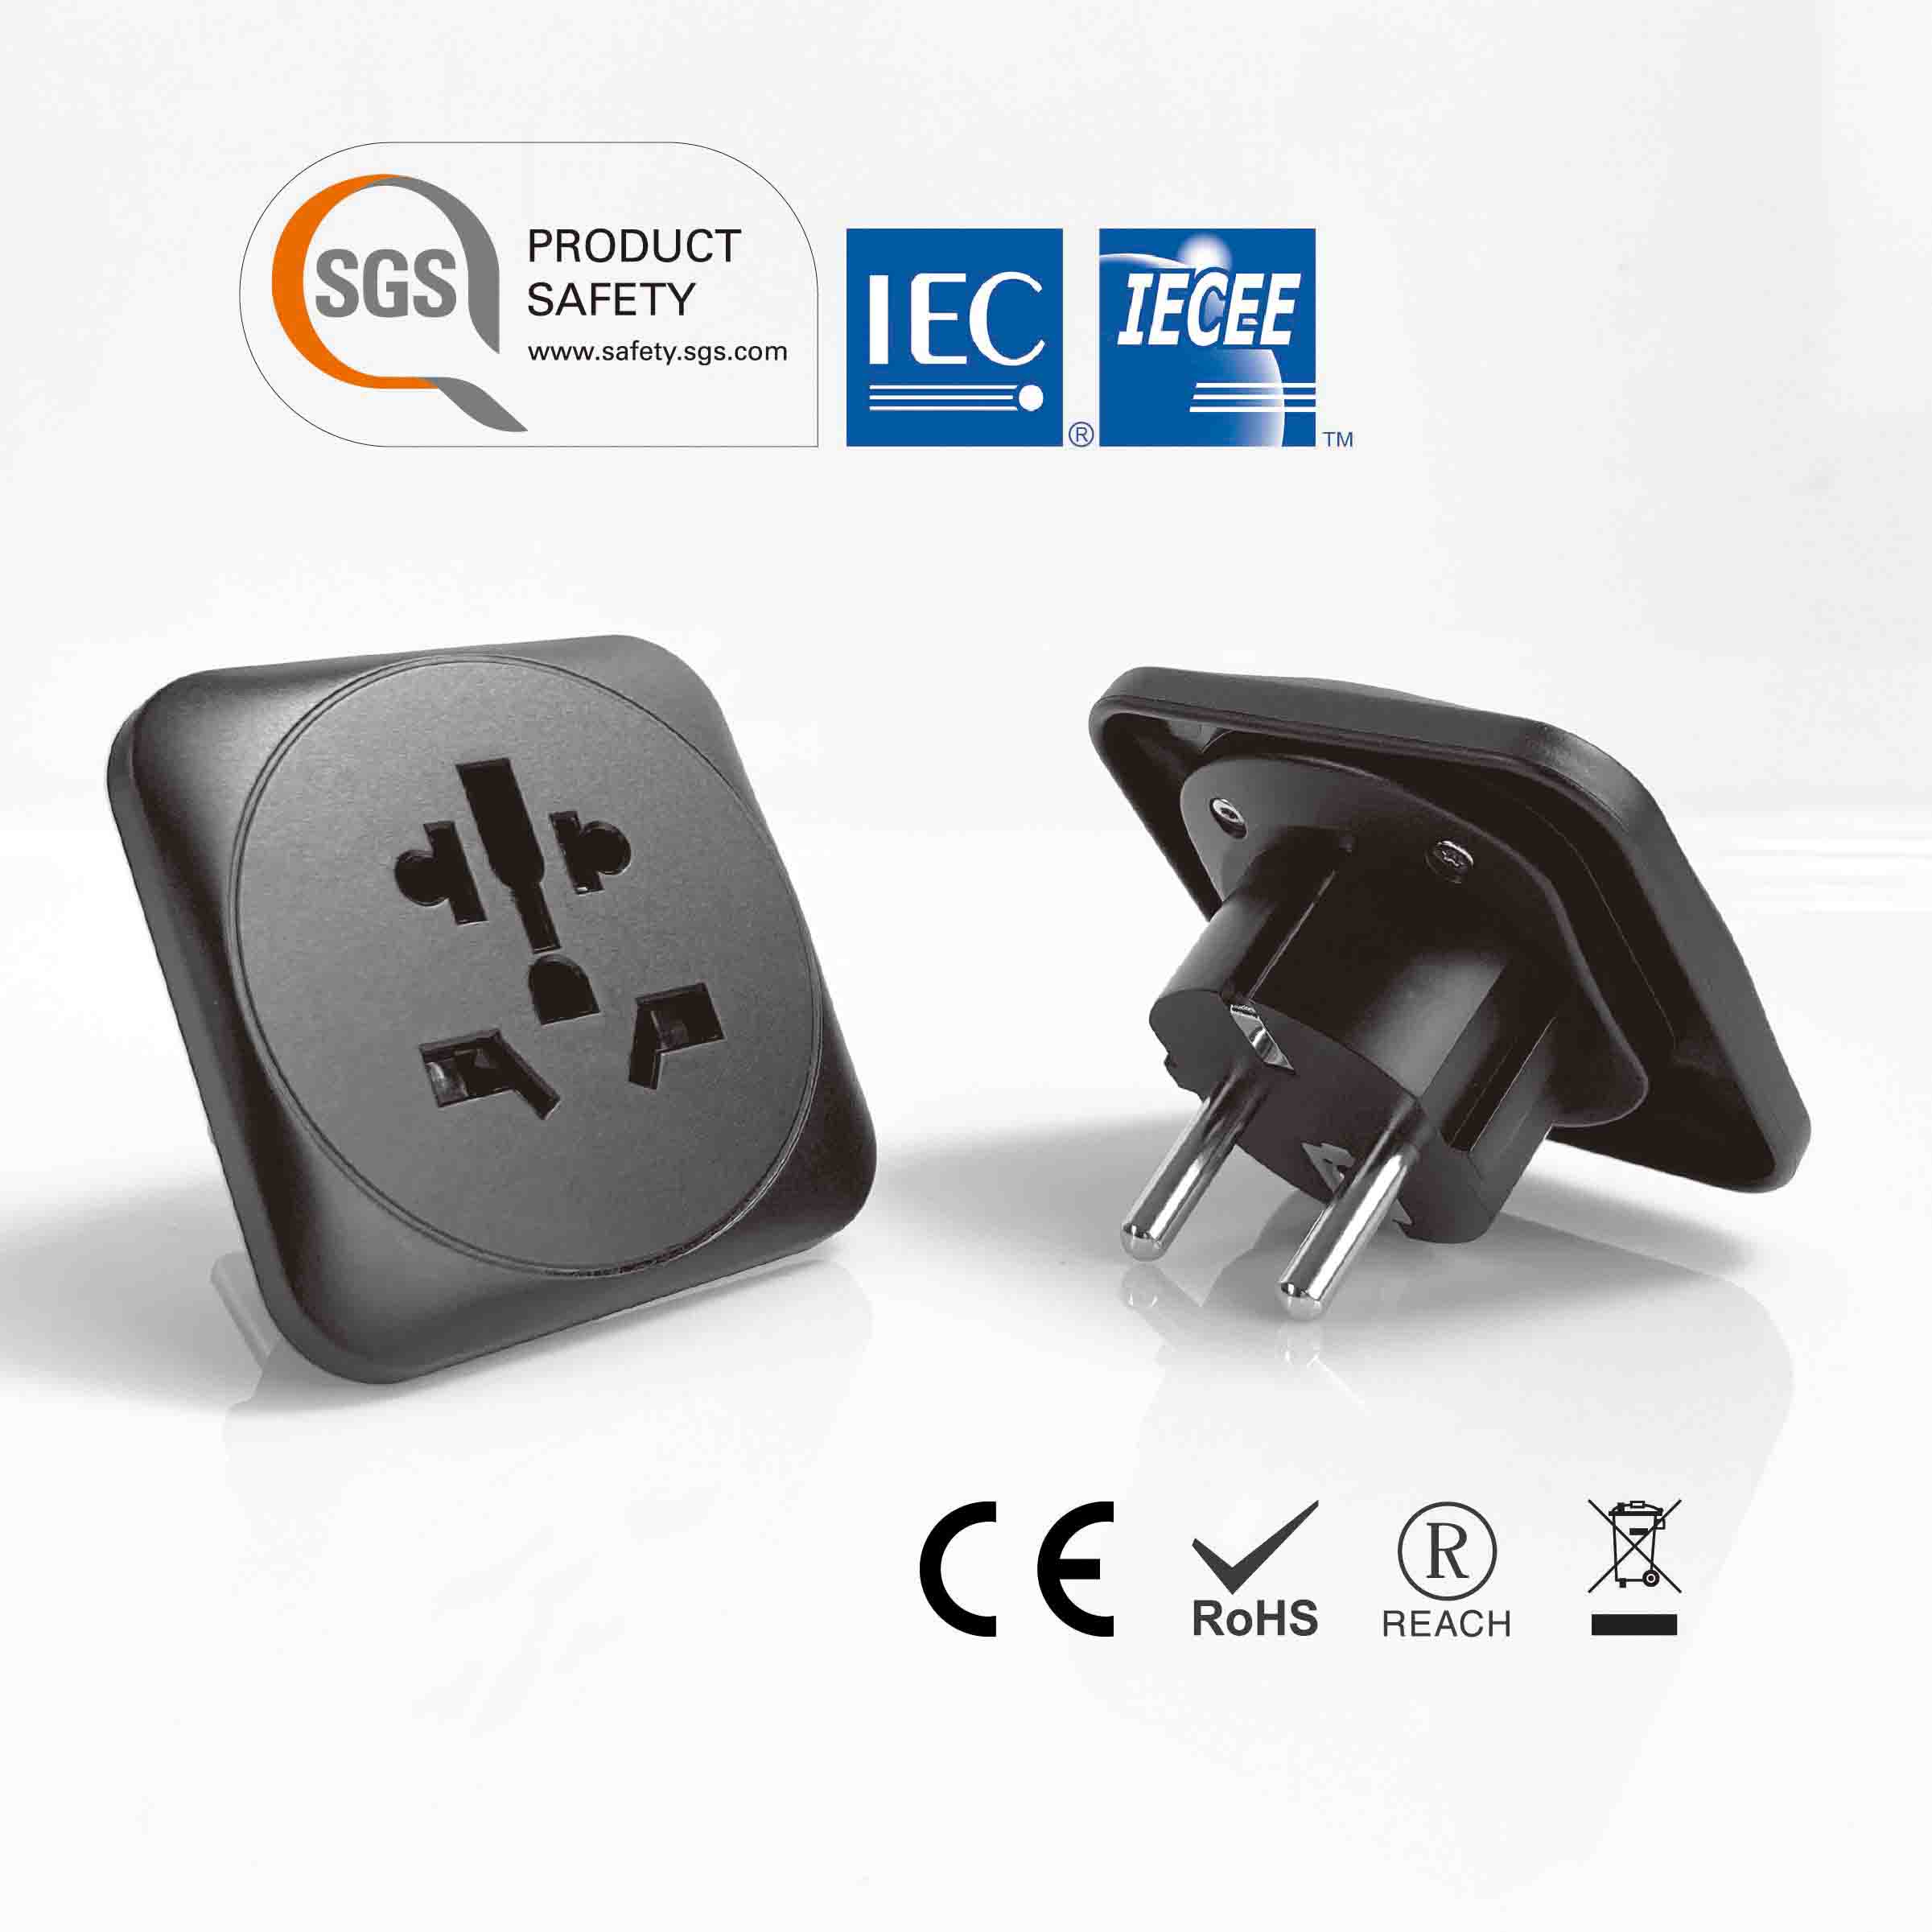 Grounded travel plug adapter - Grounded Travel Power Adapter, Europe Travel  Plug, Universal Grounded Travel Plug,World To EU Grounded Plug With 3 Poles  | Supplier of Power Related Products From Taiwan |